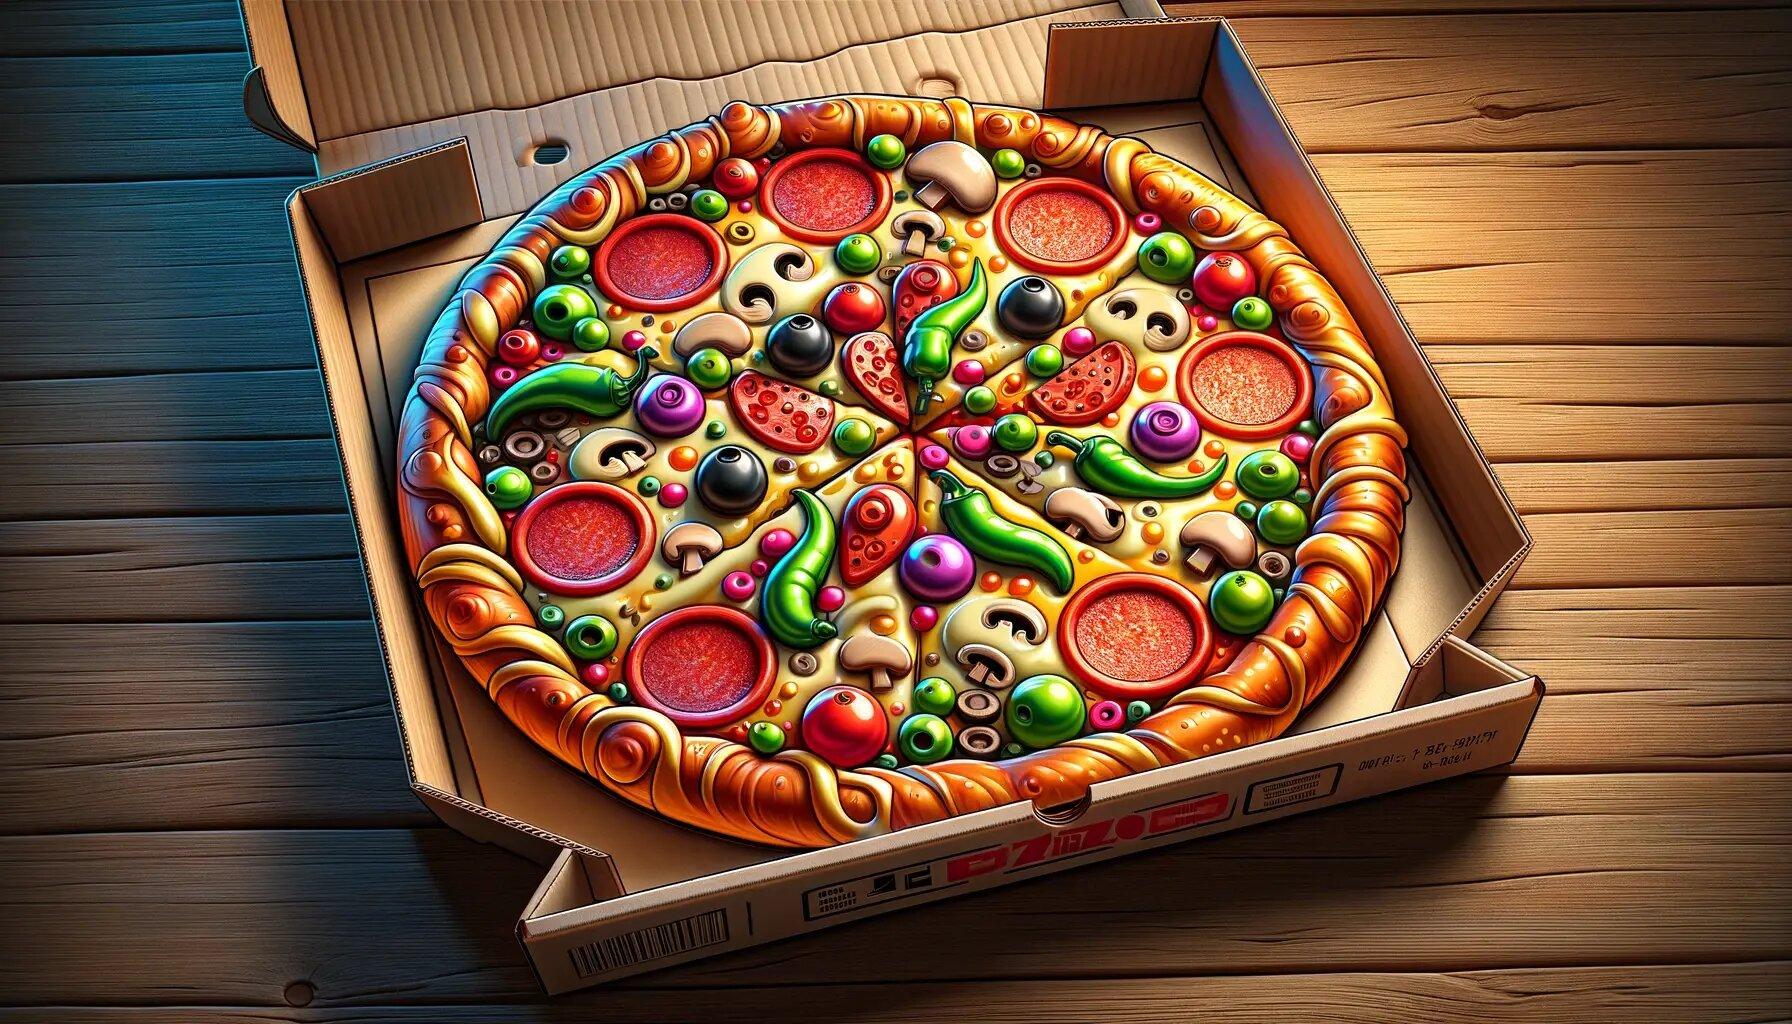  image featuring a takeaway pizza in a cardboard box. The pizza is steaming hot, with melted cheese, pepperoni, mushrooms, green peppers, and olives. The box is open, revealing the pizza inside, set on a wooden table. 